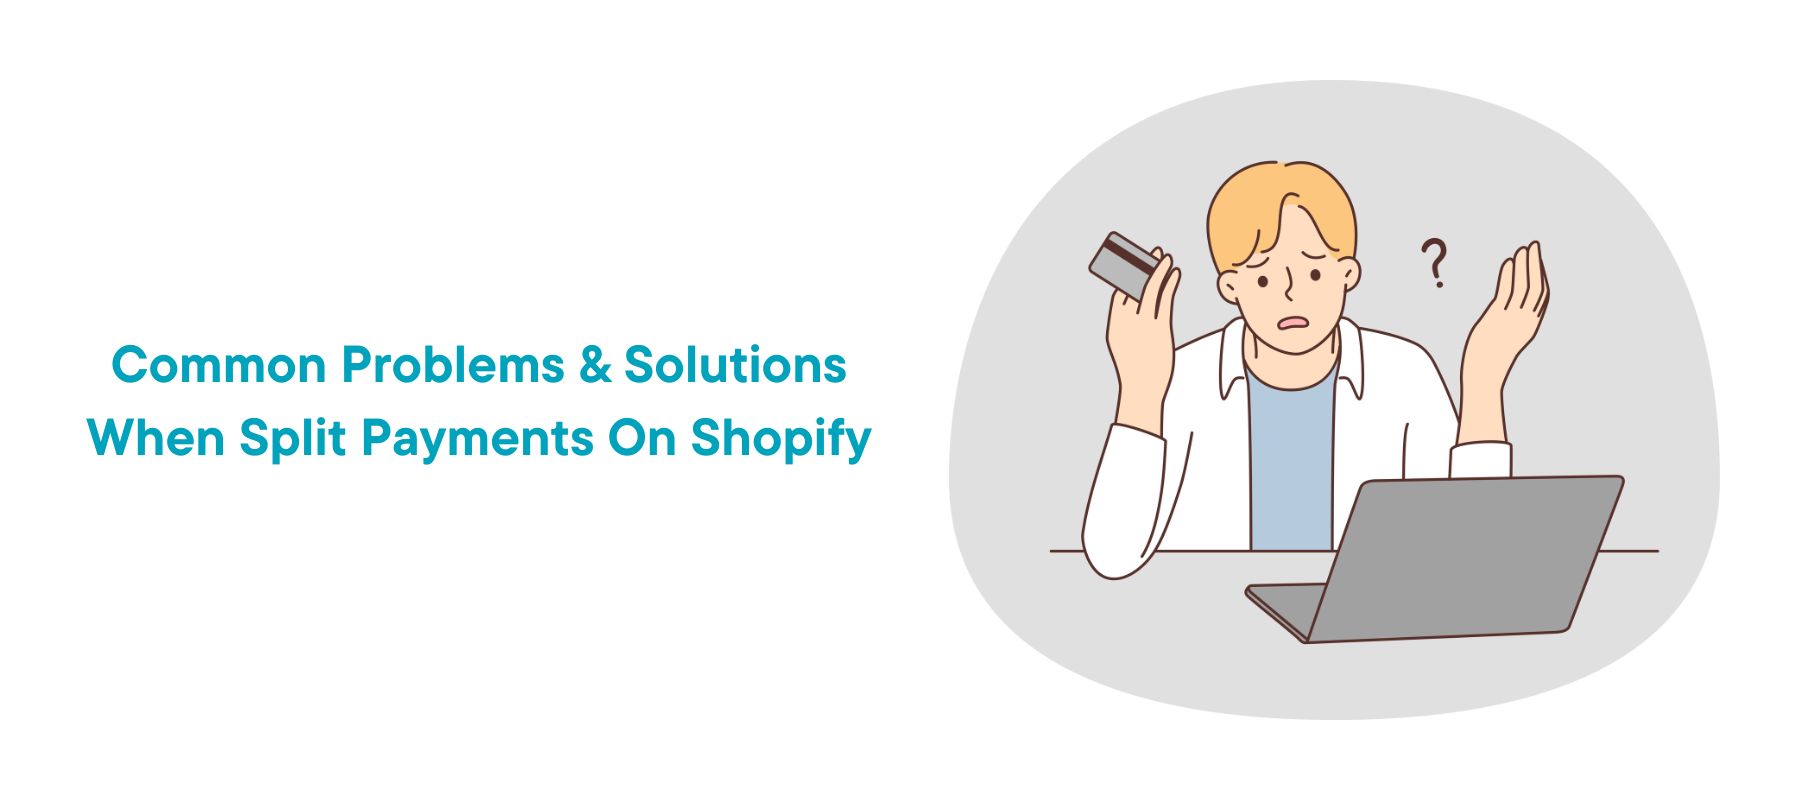 Common Problems & Solutions When Split Payments On Shopify